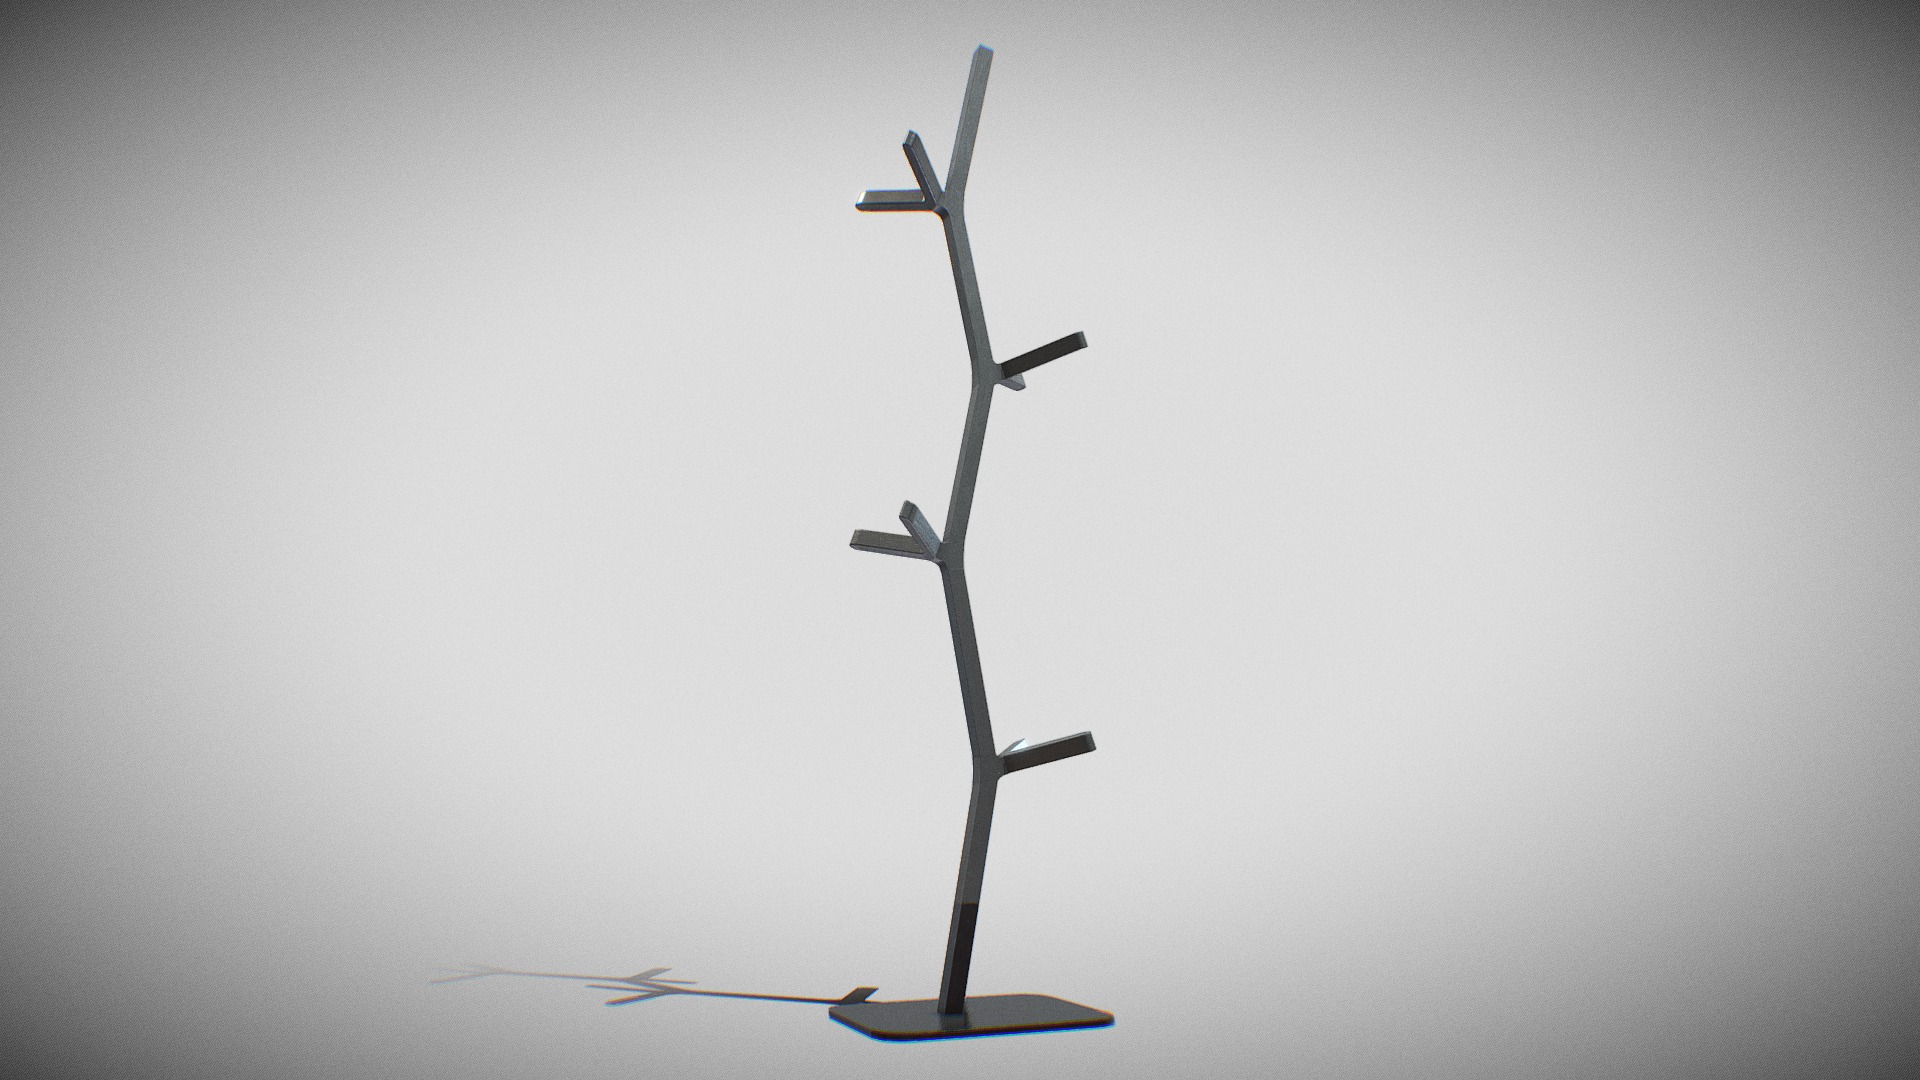 3D model Nara CoatStand-BlackAsh - This is a 3D model of the Nara CoatStand-BlackAsh. The 3D model is about a jet flying in the sky.